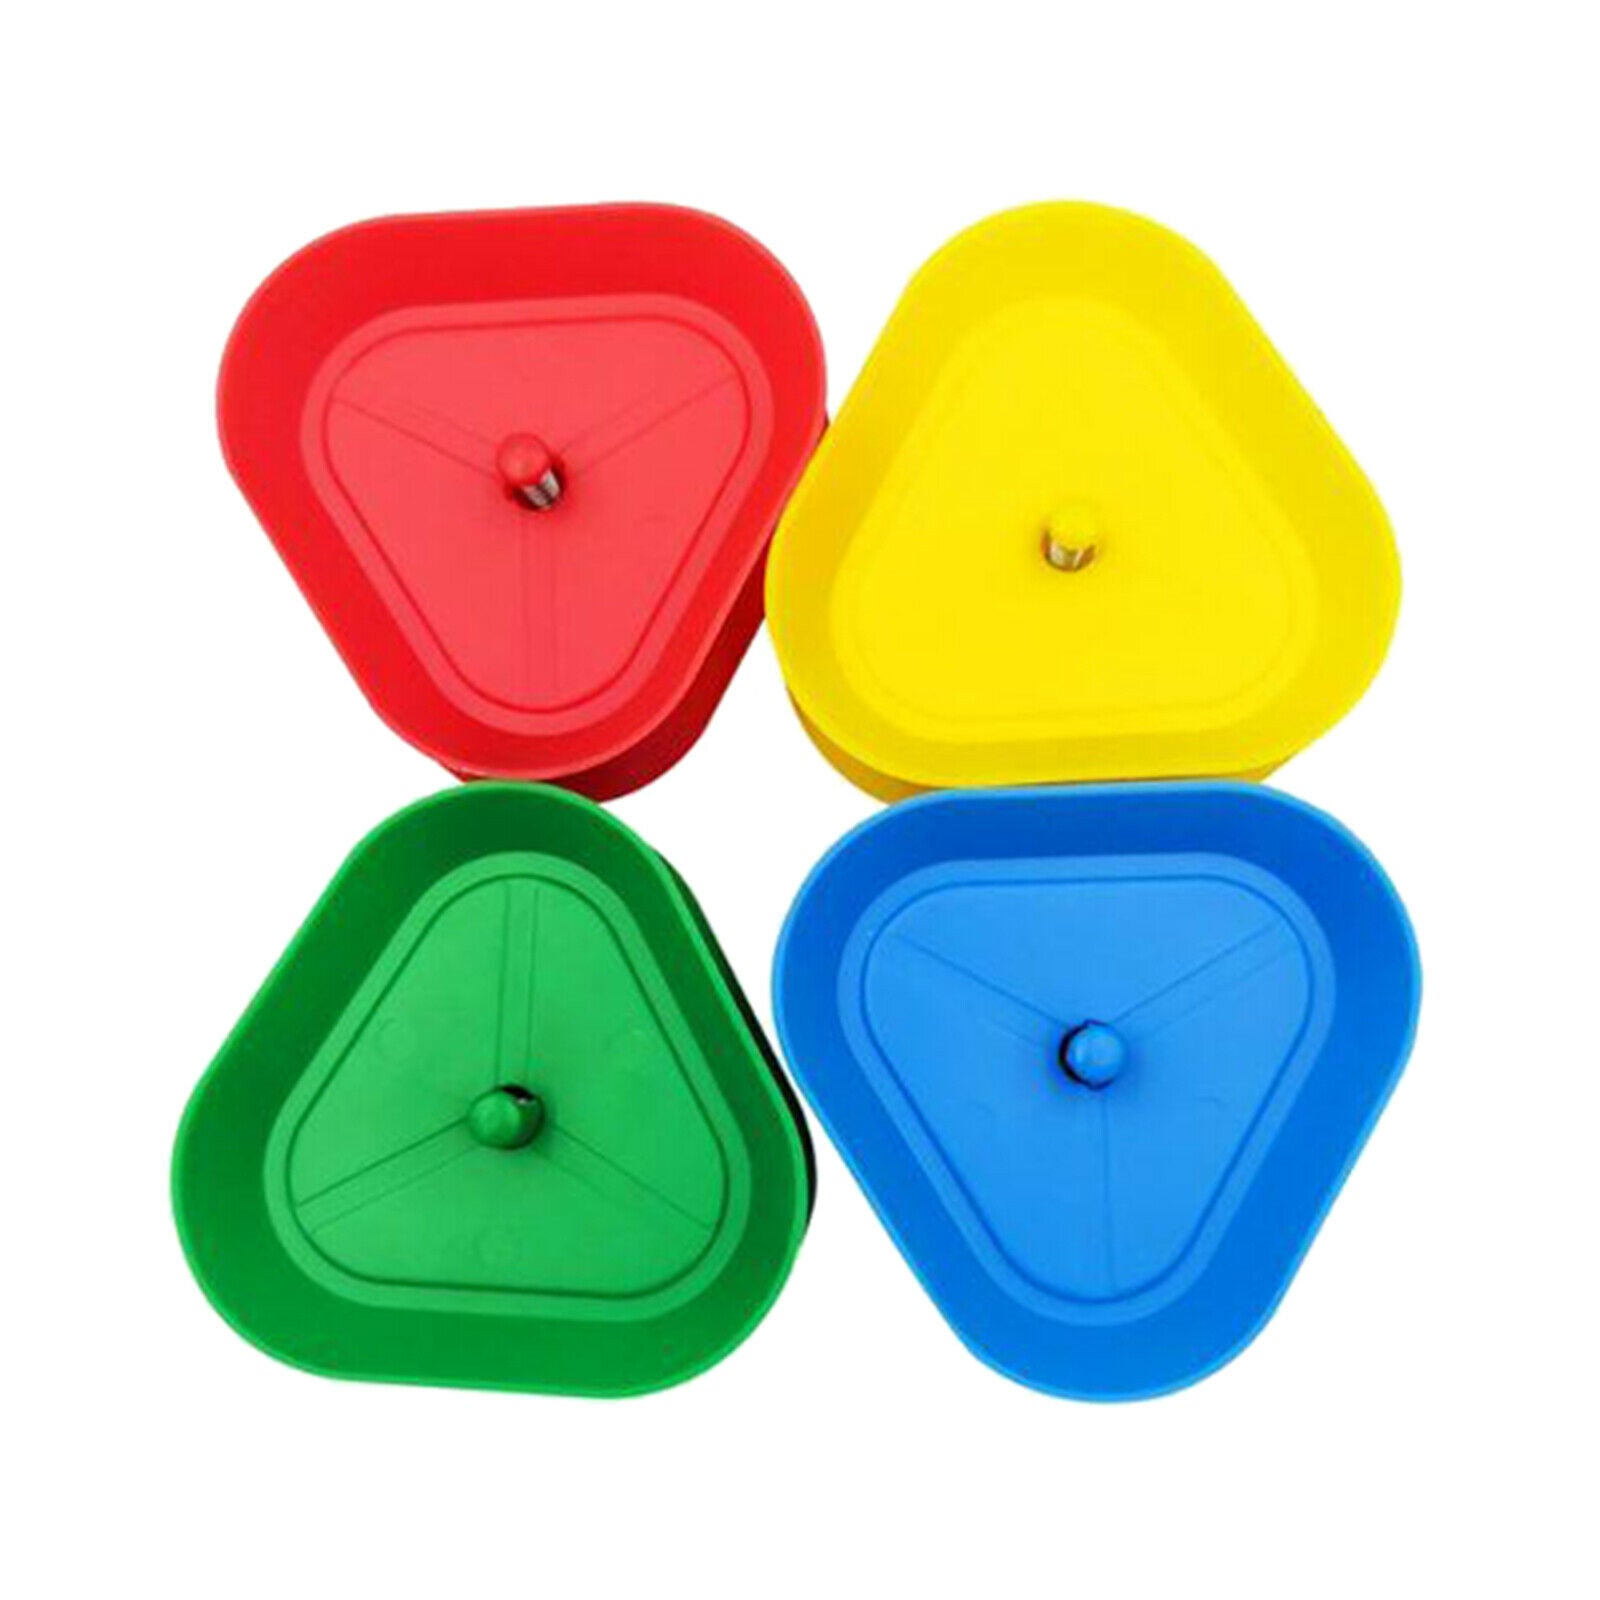 Set of 4 Plastic Triangle Shaped Poker Playing Card Holder Rack 4 Colors